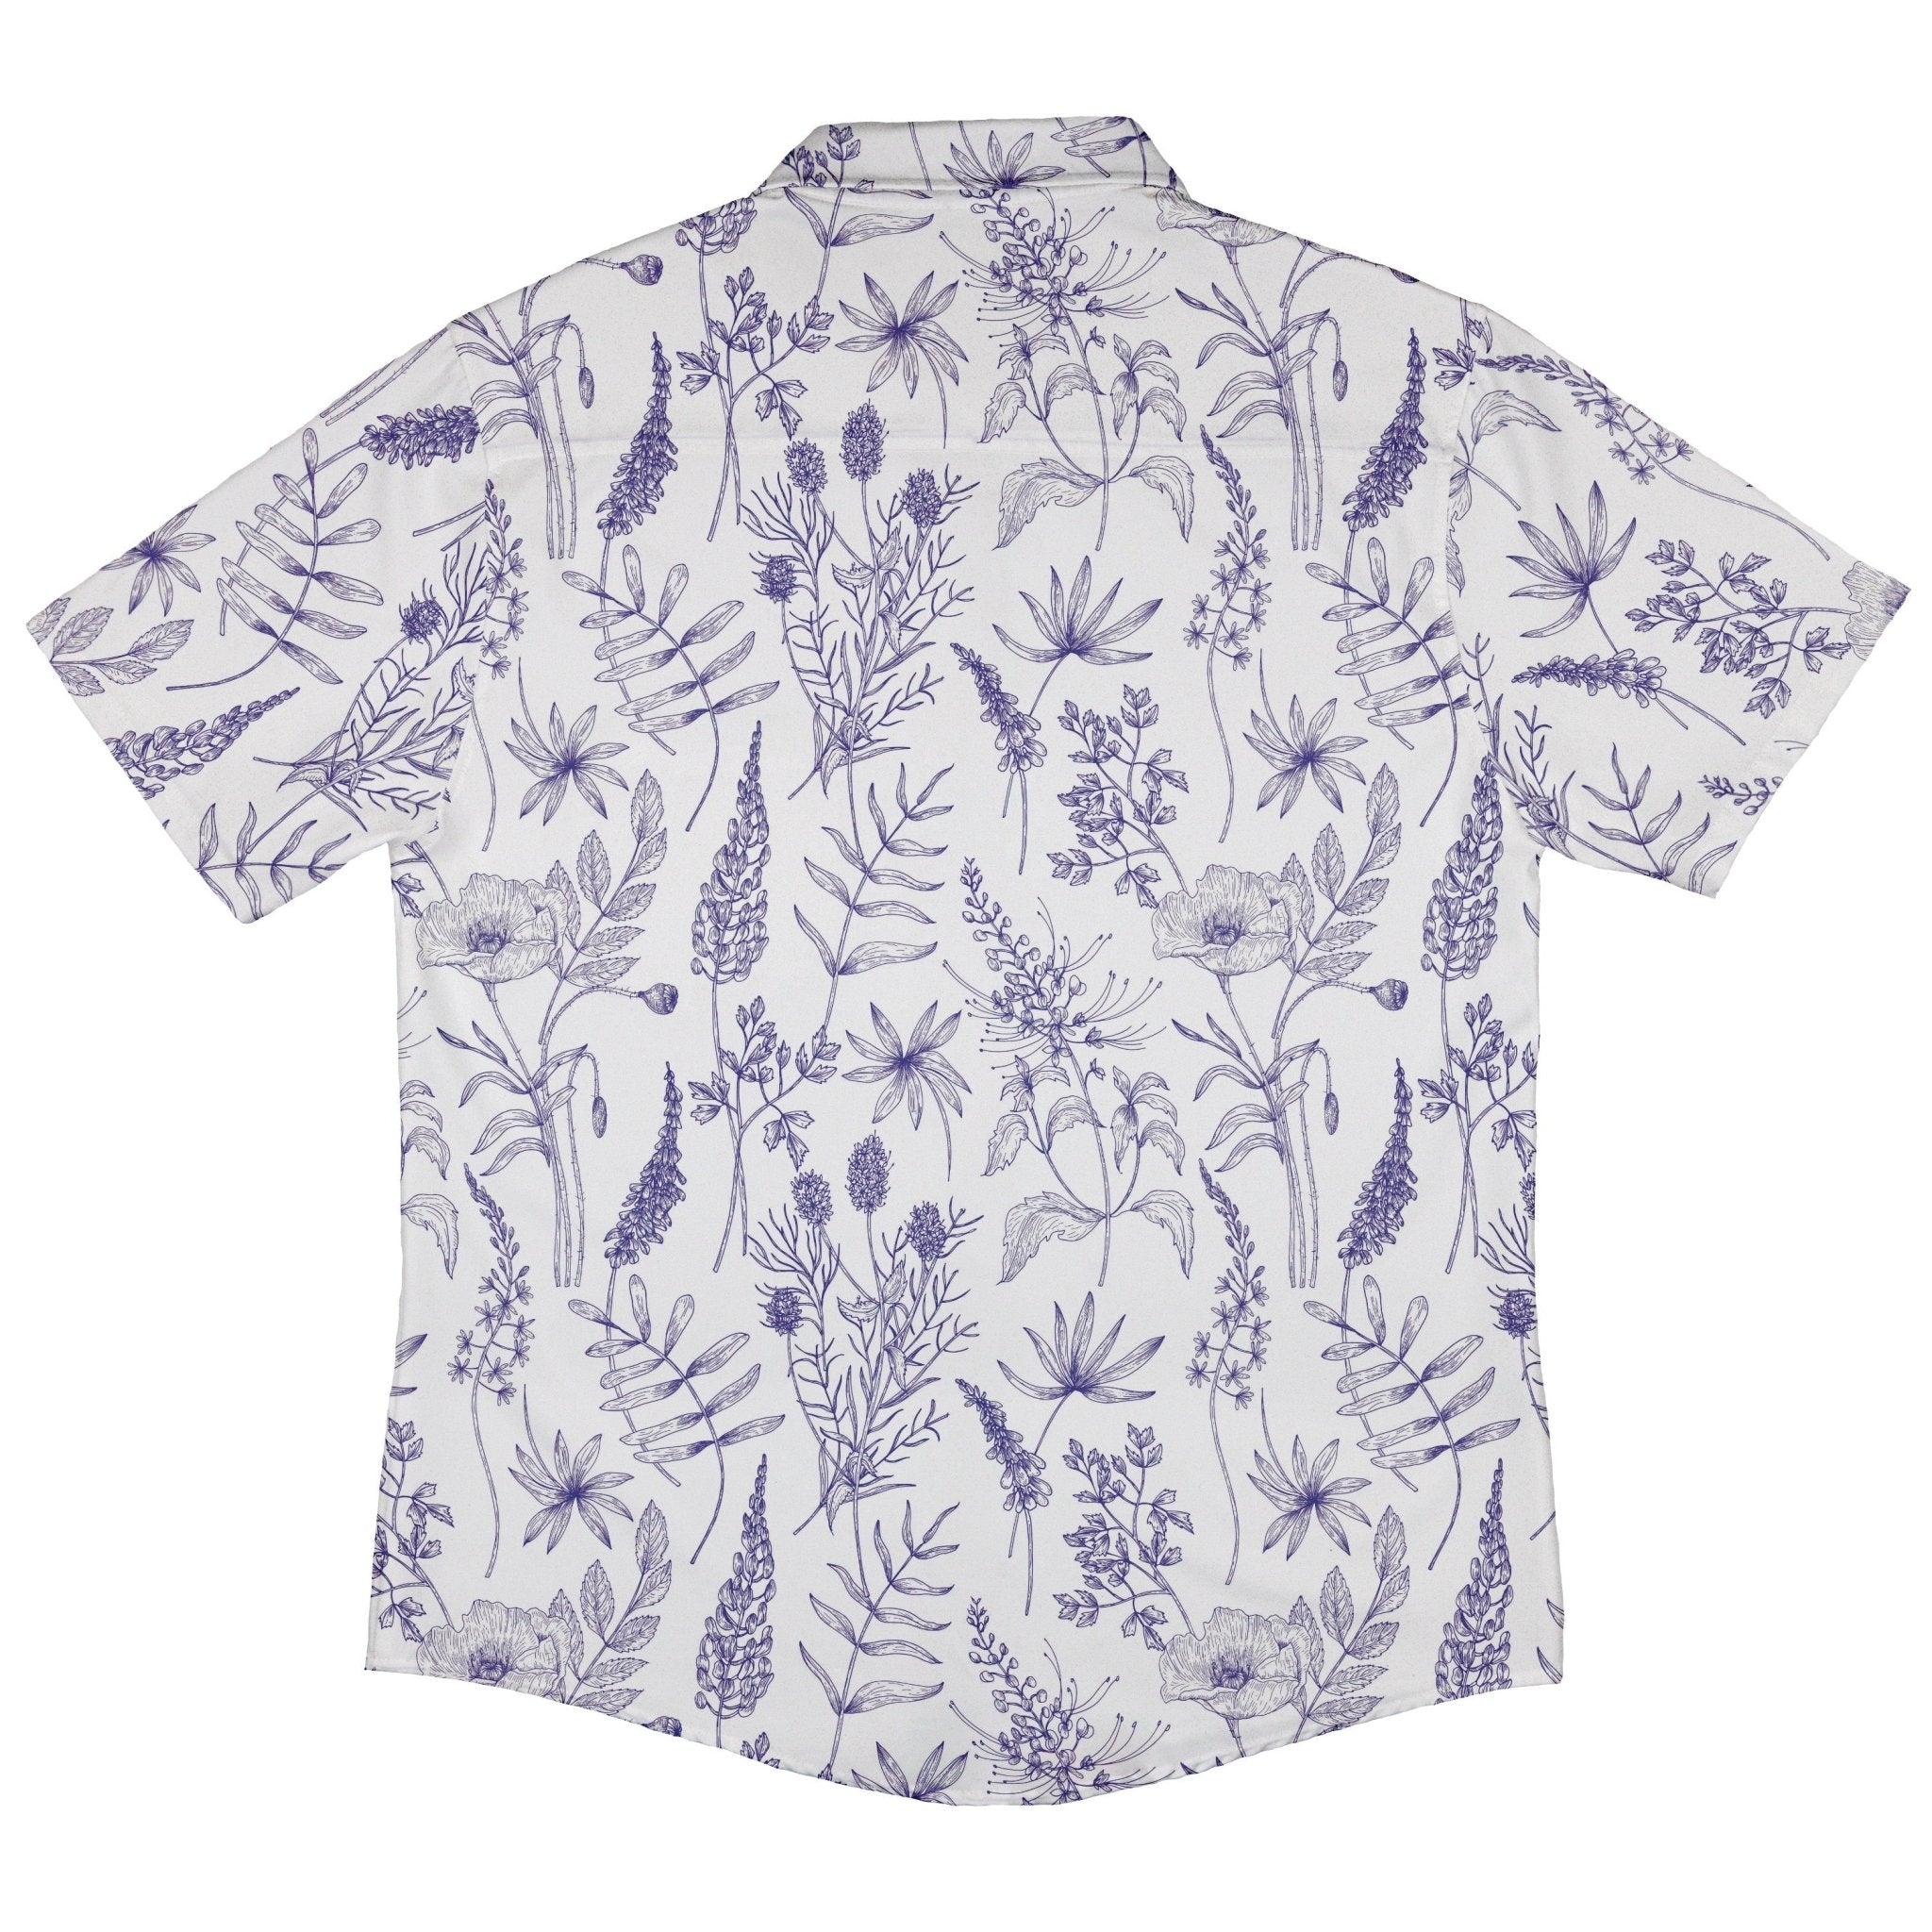 Simple Botany Flowers Herbs White Blue Button Up Shirt - adult sizing - Botany Print - Simple Patterns